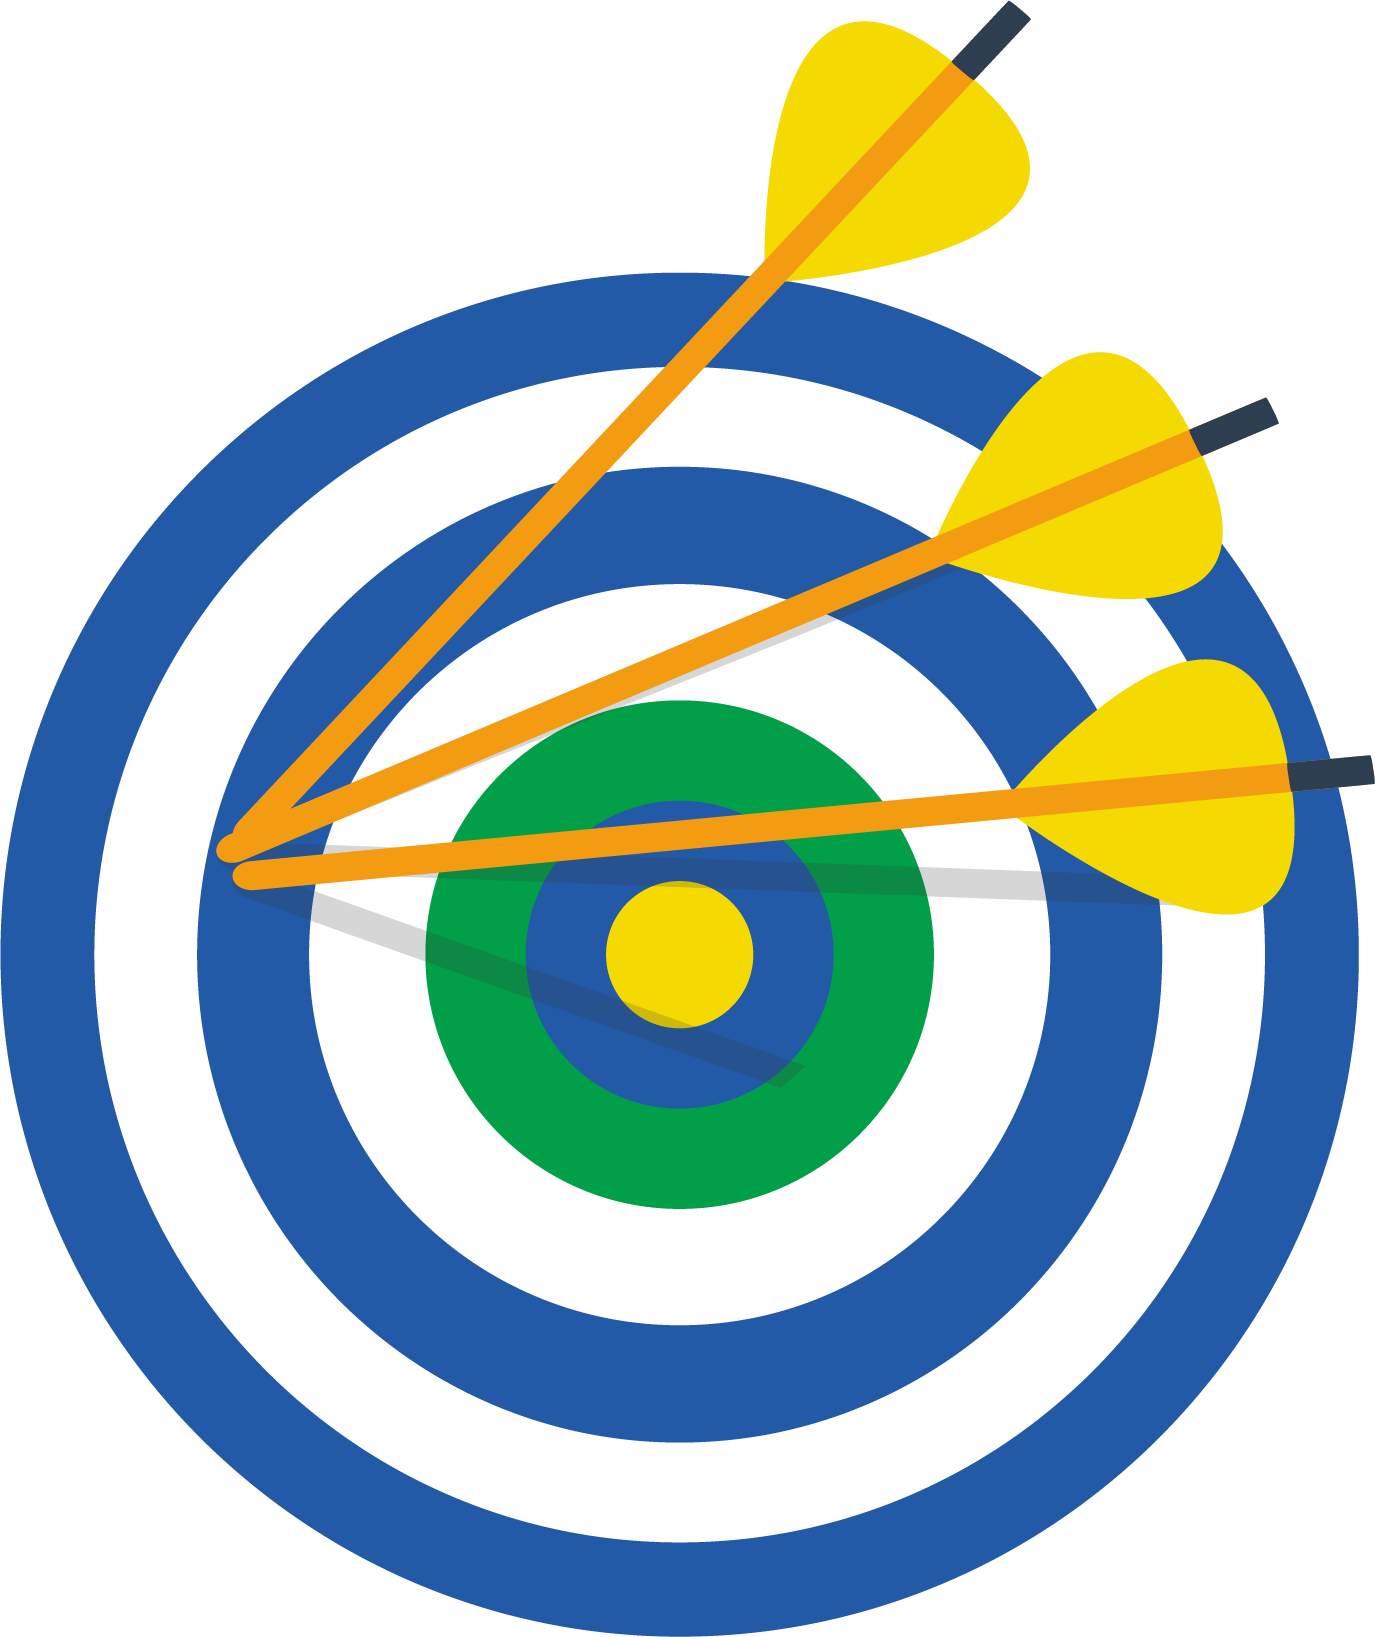 A target is used to illustrate high precision by showing 3 arrows with yellow flags that are very far from the bullseye on the blue, white and green target, but have consistently landed in the same spot.